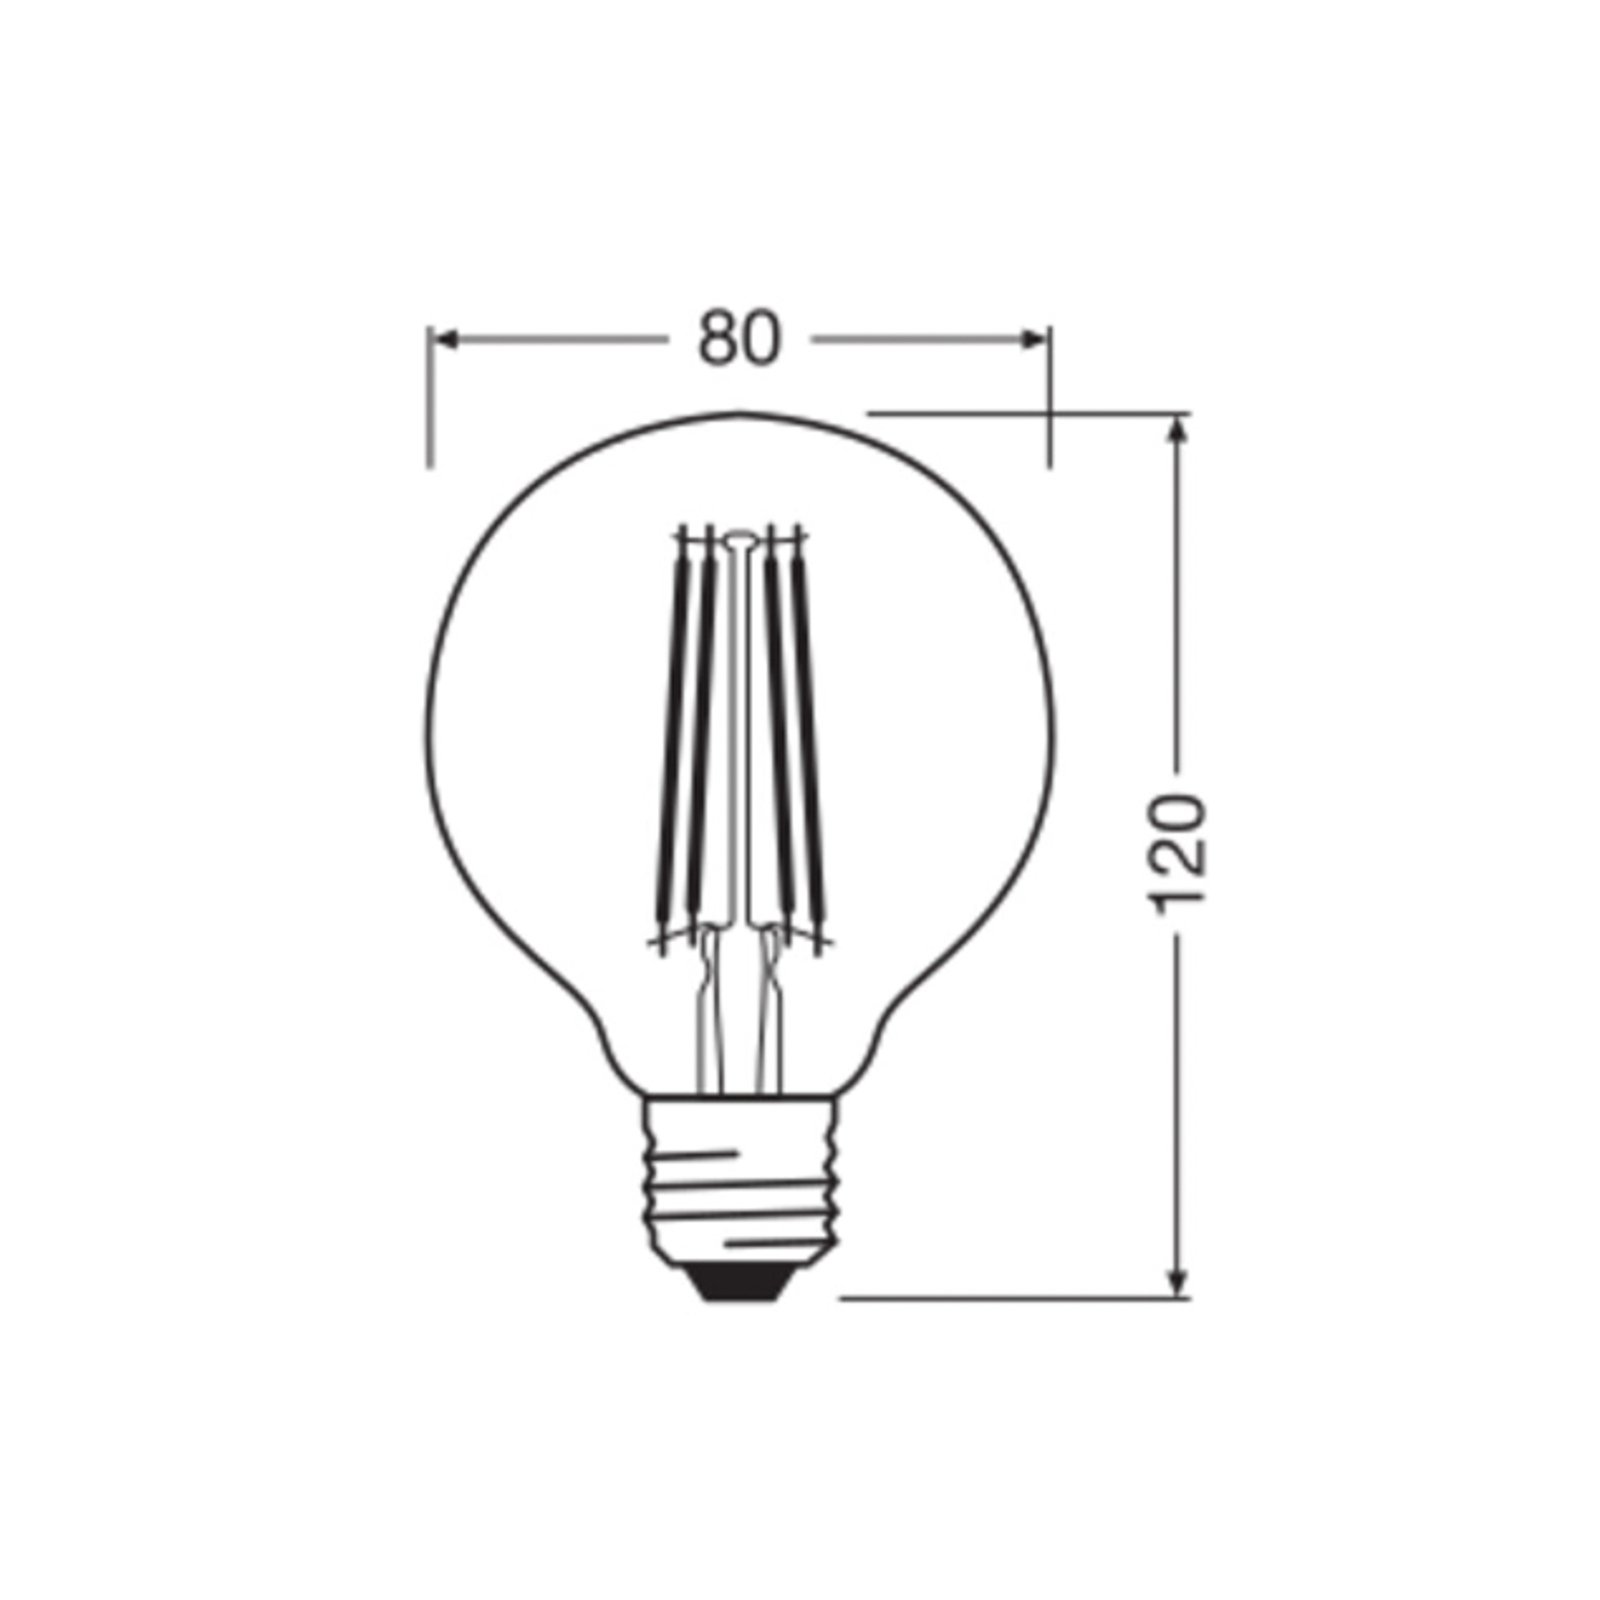 OSRAM LED Vintage 1906, G80, E27, 7.2 W, gold, 2,400 K, dimmable.